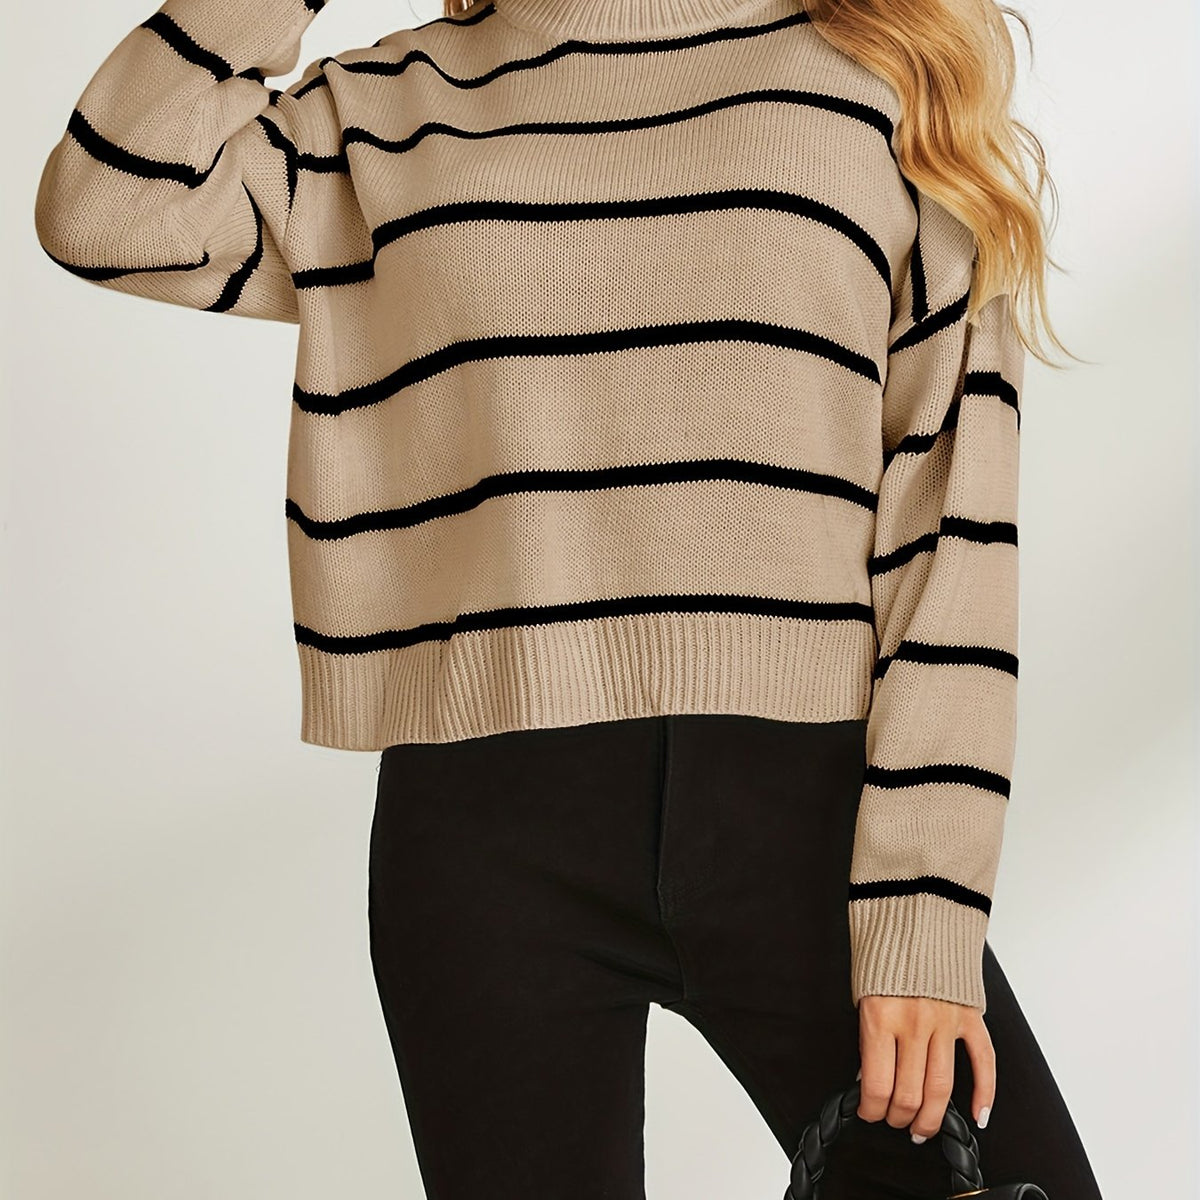 Stripe Print Drop Shoulder Knit Sweater, Casual Crew Neck Long Sleeve Pullover Sweater, Women's Clothing